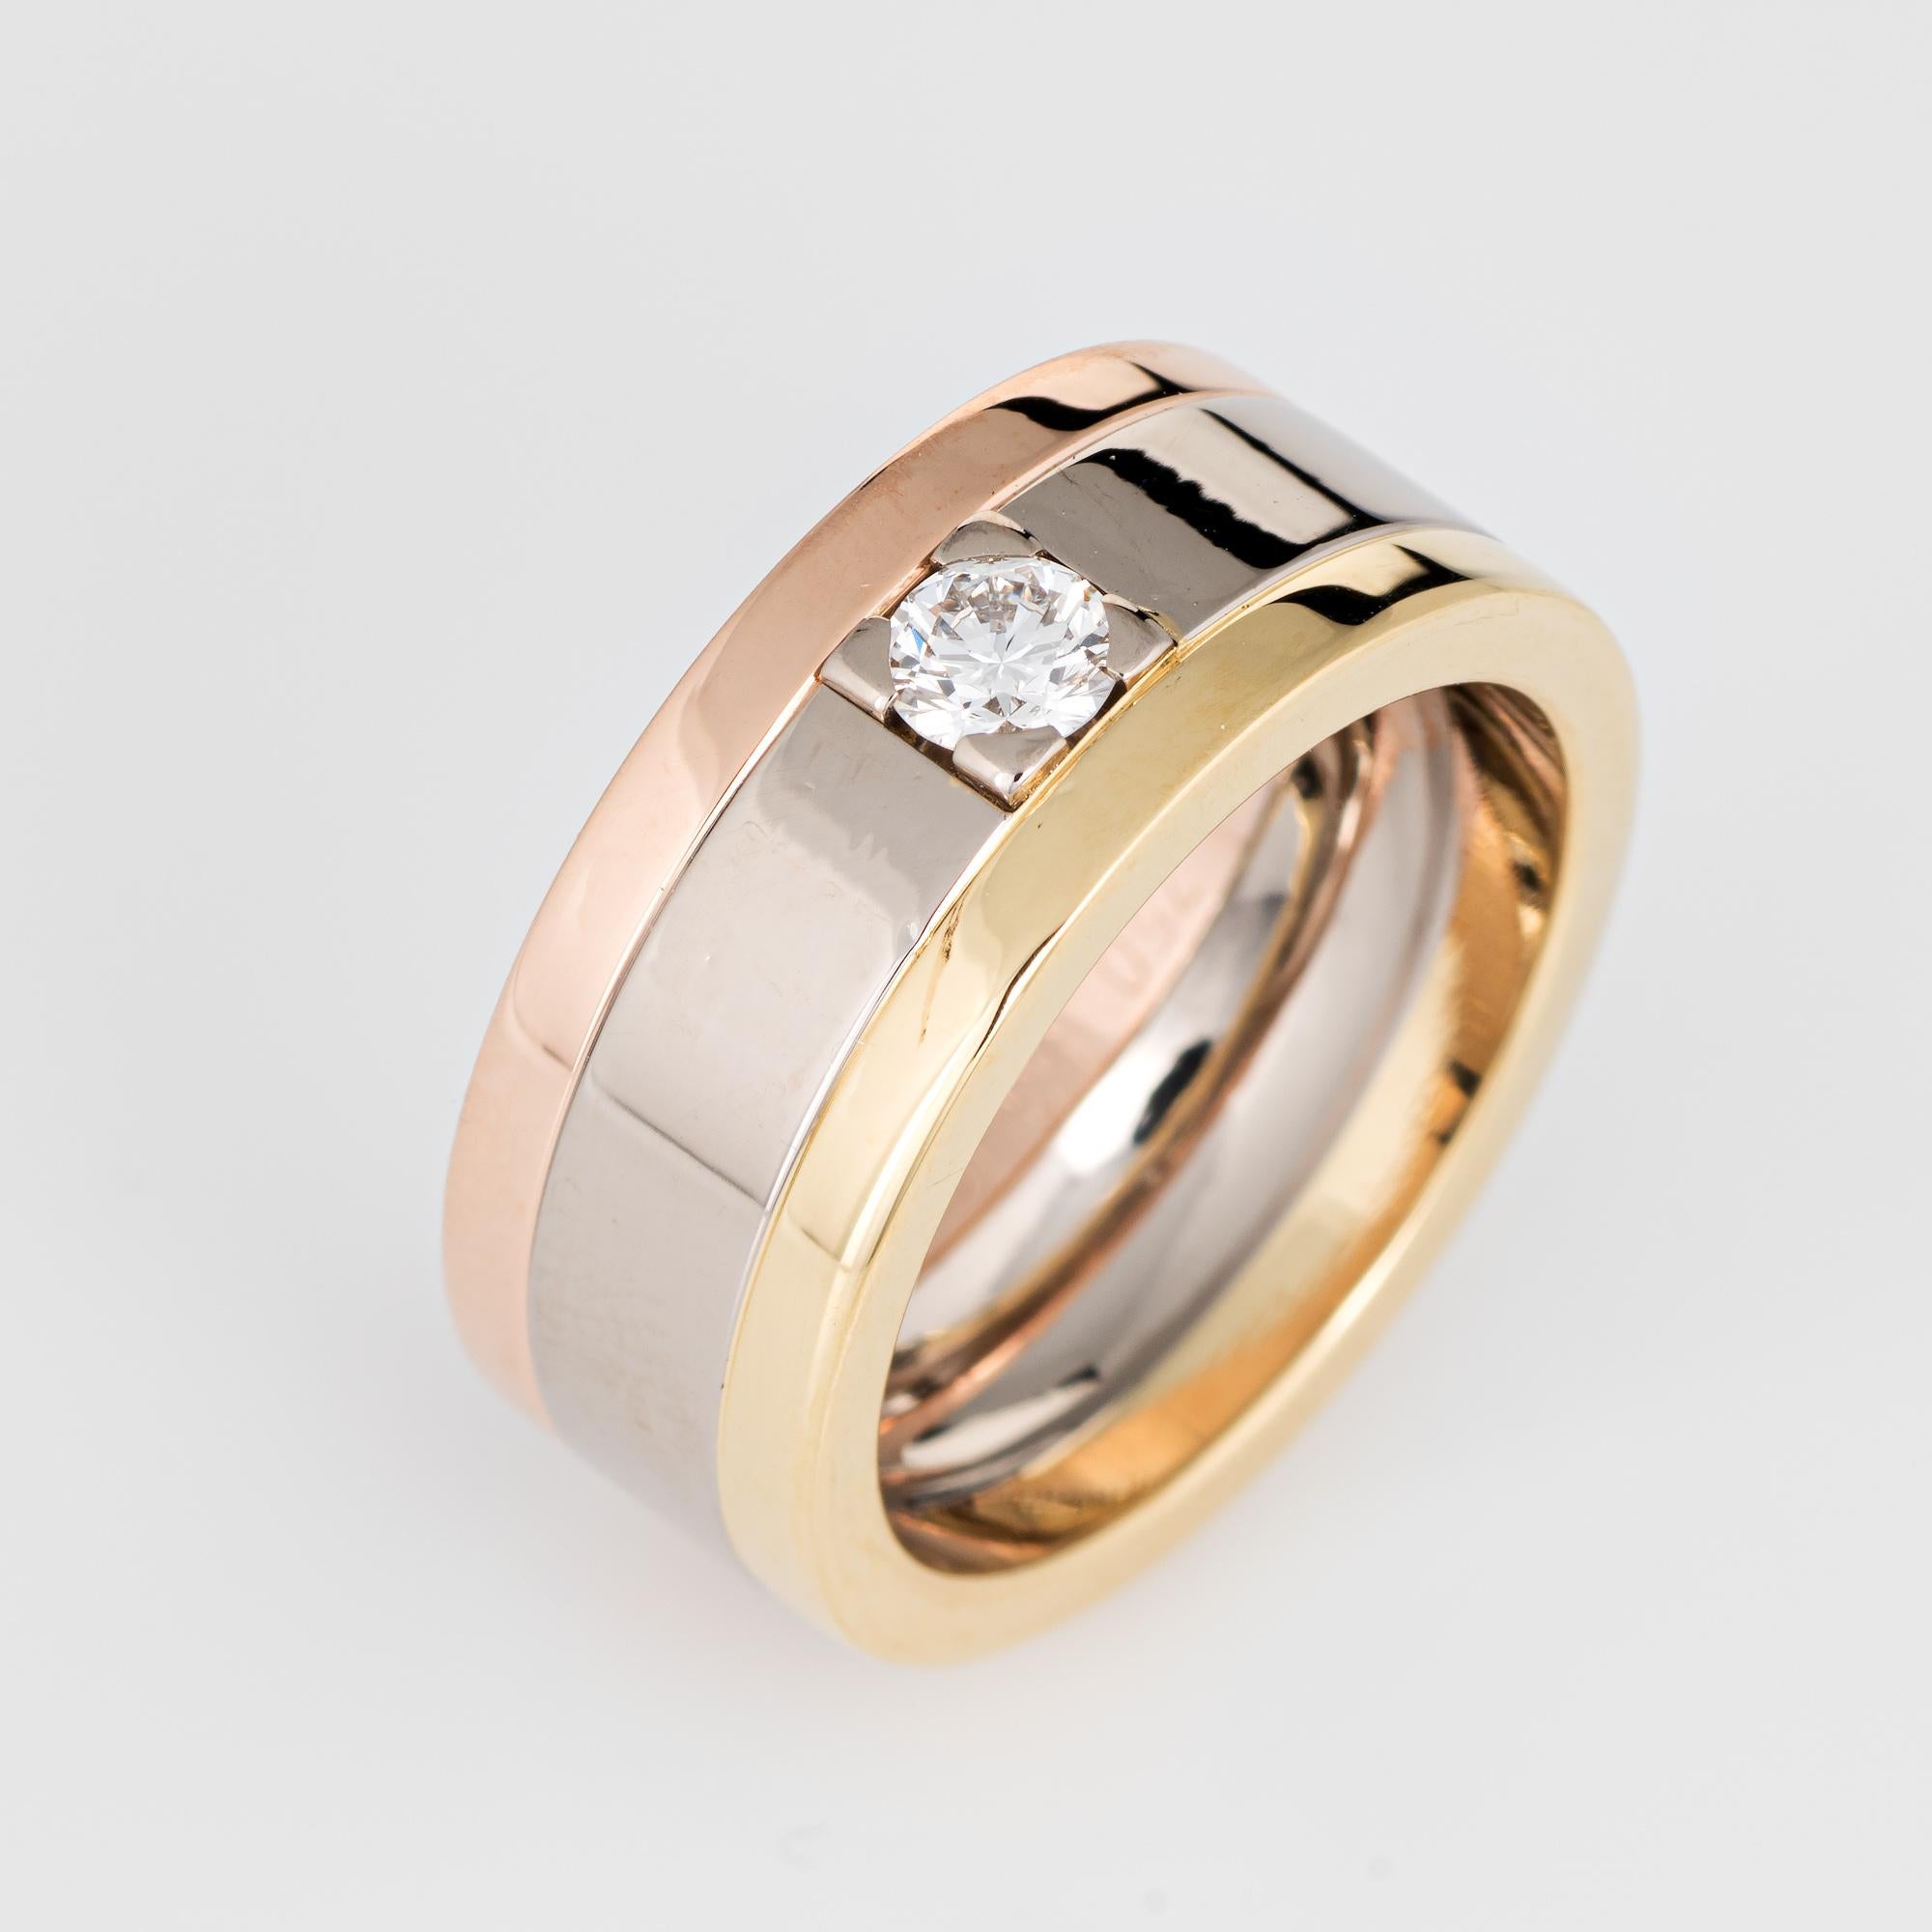 Pre owned vintage Cartier diamond ring crafted in 18 karat rose, yellow and white gold.  

The ring is set with an estimated 0.25 carat round brilliant cut diamond (estimated at F-G color and VVS2 clarity). 

The ring is in very good condition and